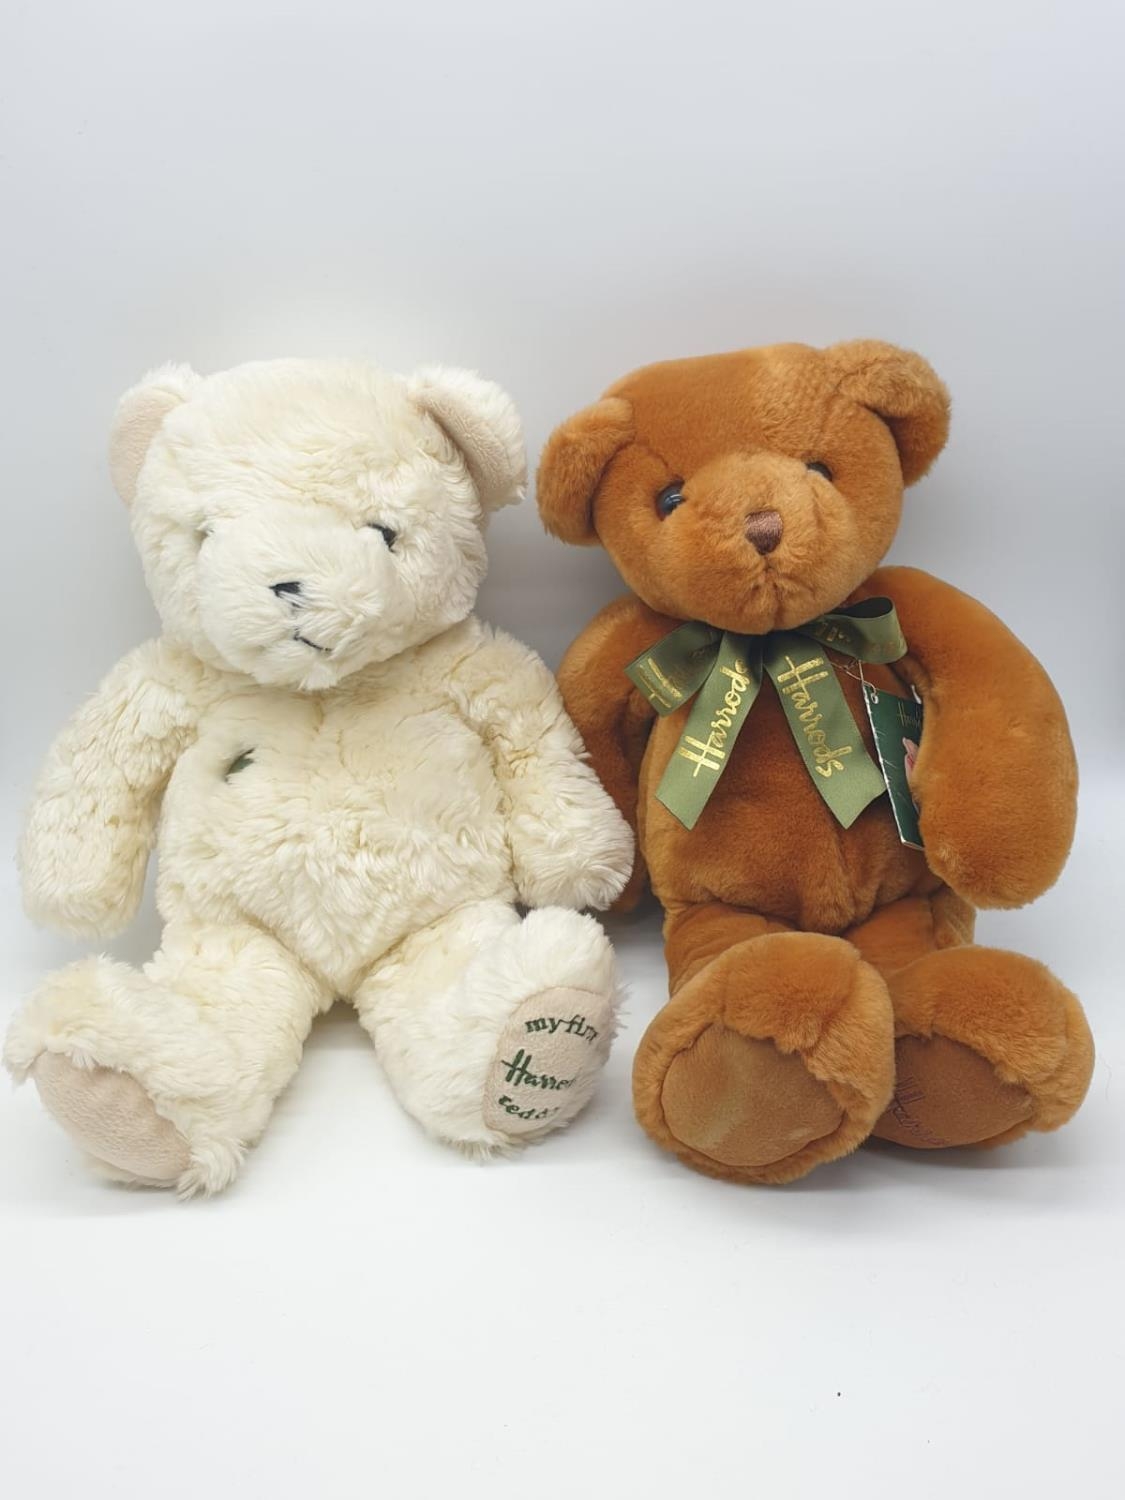 Two Harrods teddy bears, one being "My first Harrods teddy" and a traditional Harrods teddy. Approx.